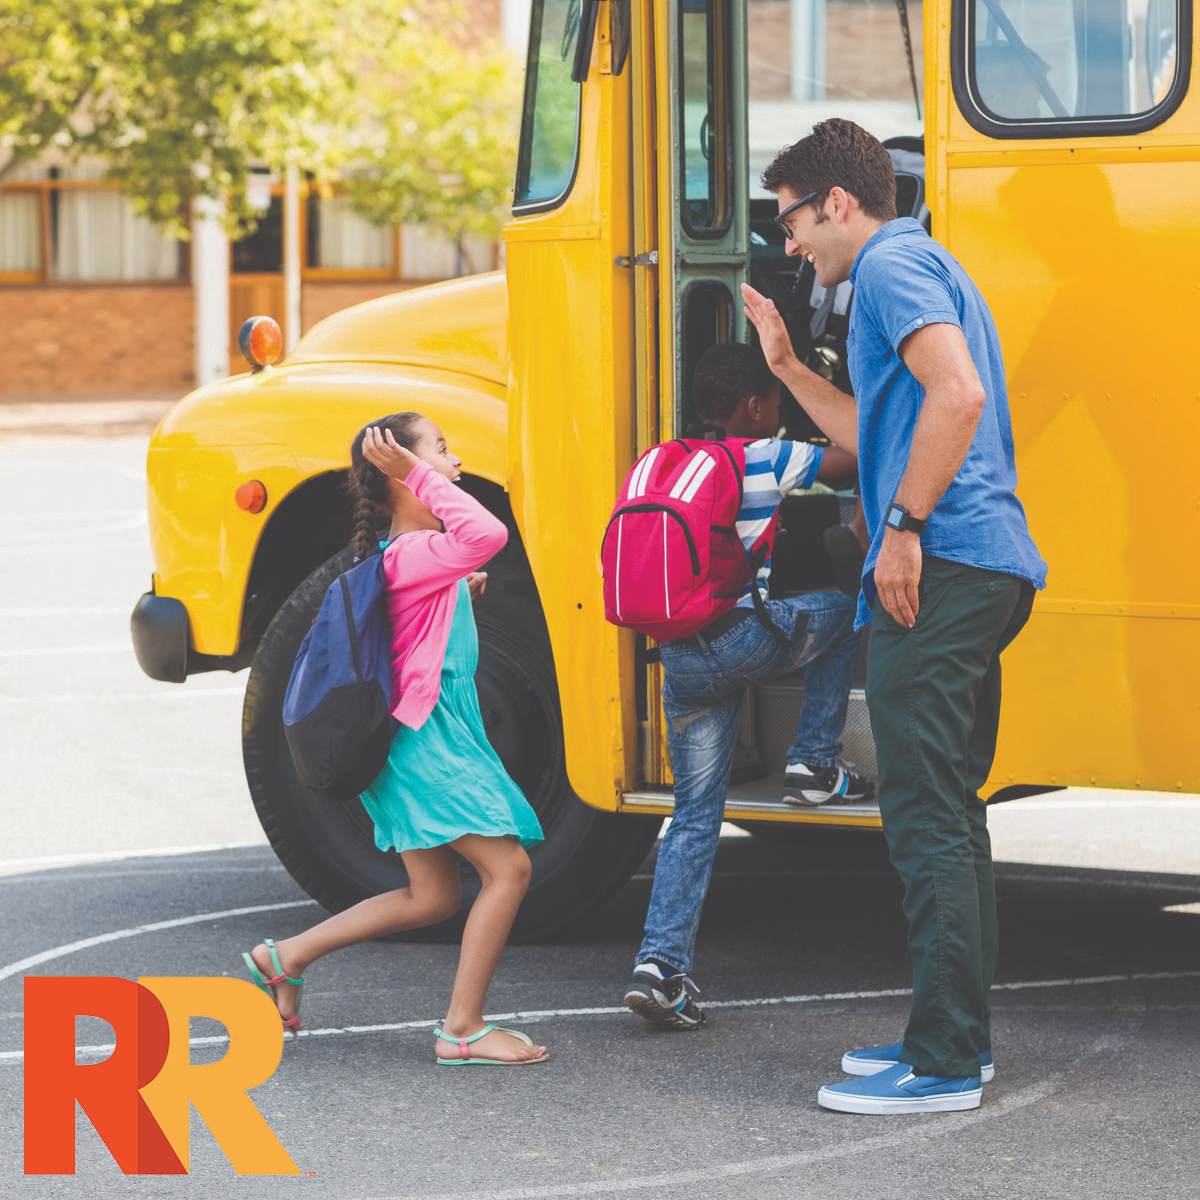 Bus driver giving students a high five as they board the school bus in a parking lot.